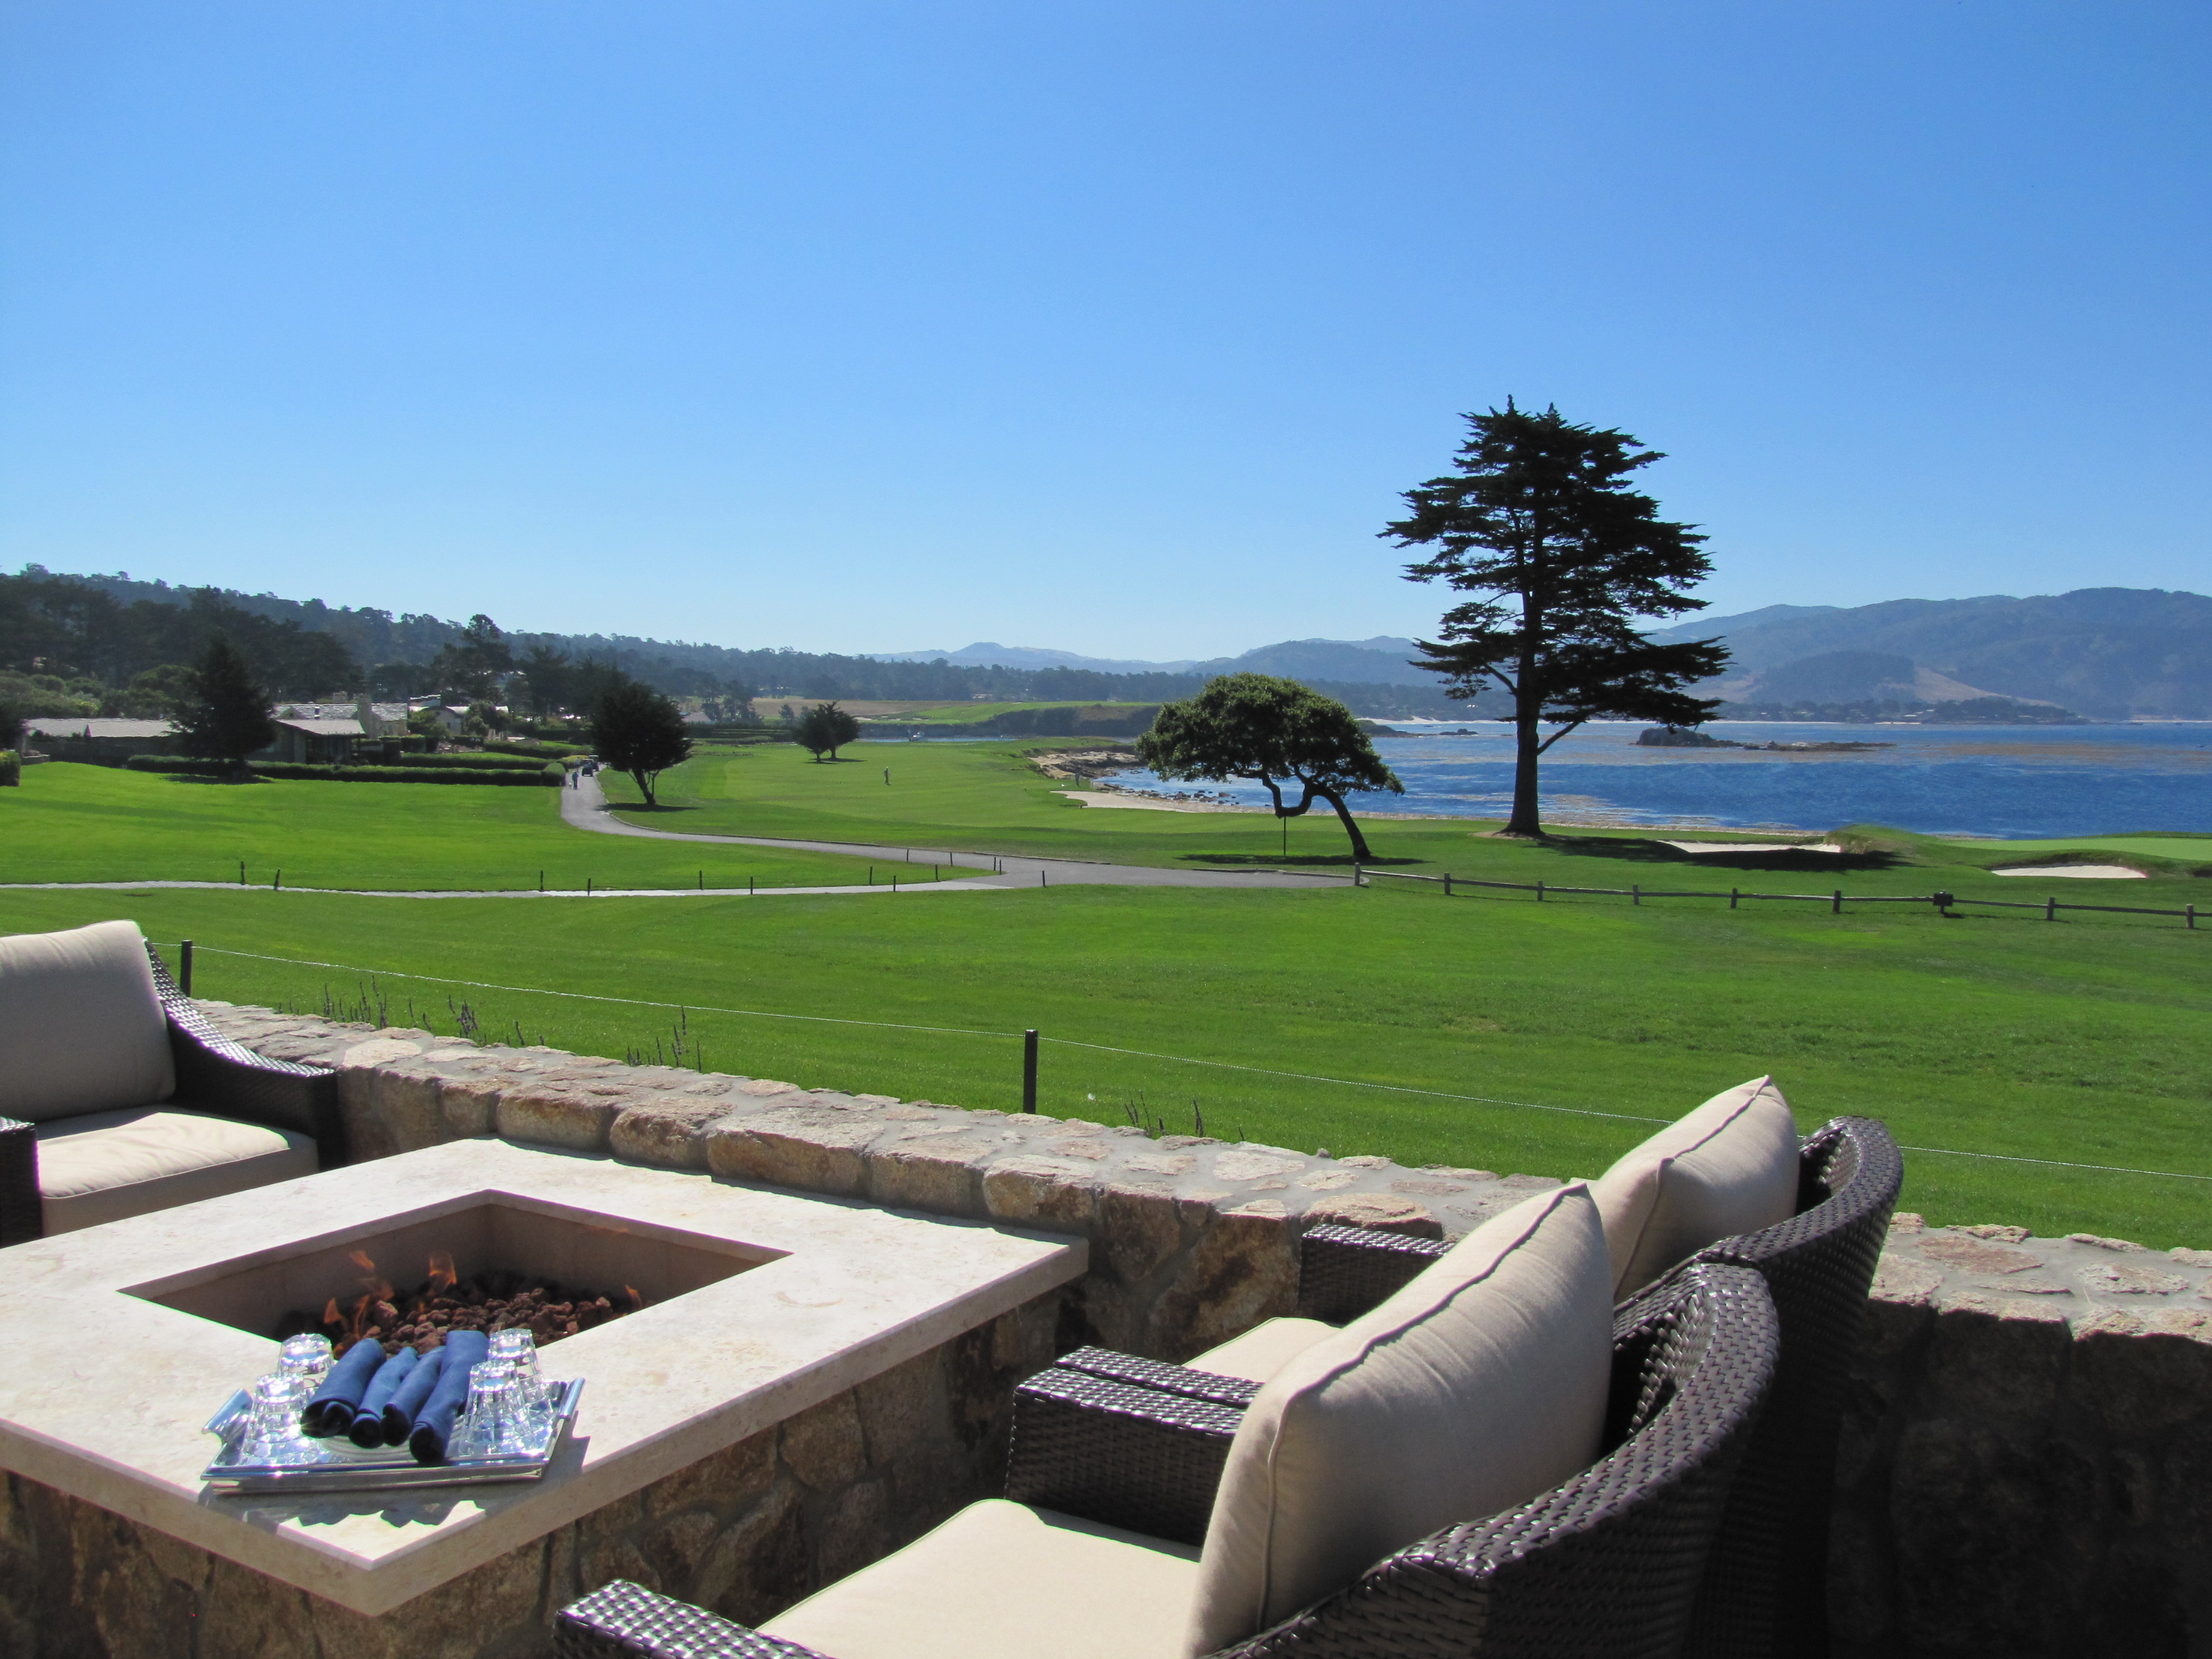 Outdoor seating at The Bench over looking Pebble Beach's golf course